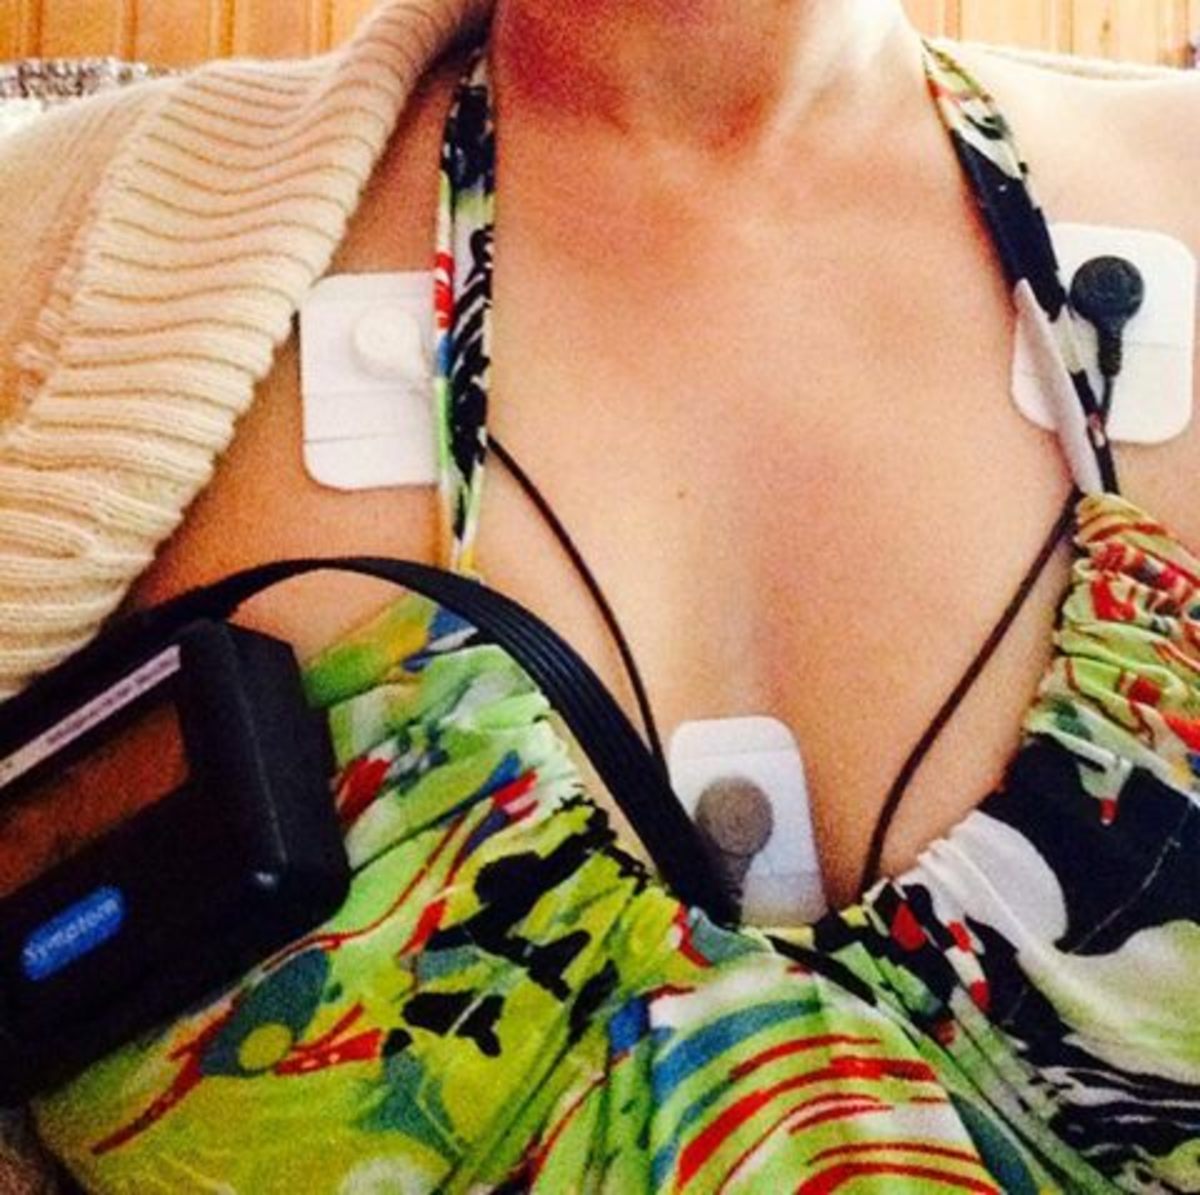 Wearing a Holter monitor